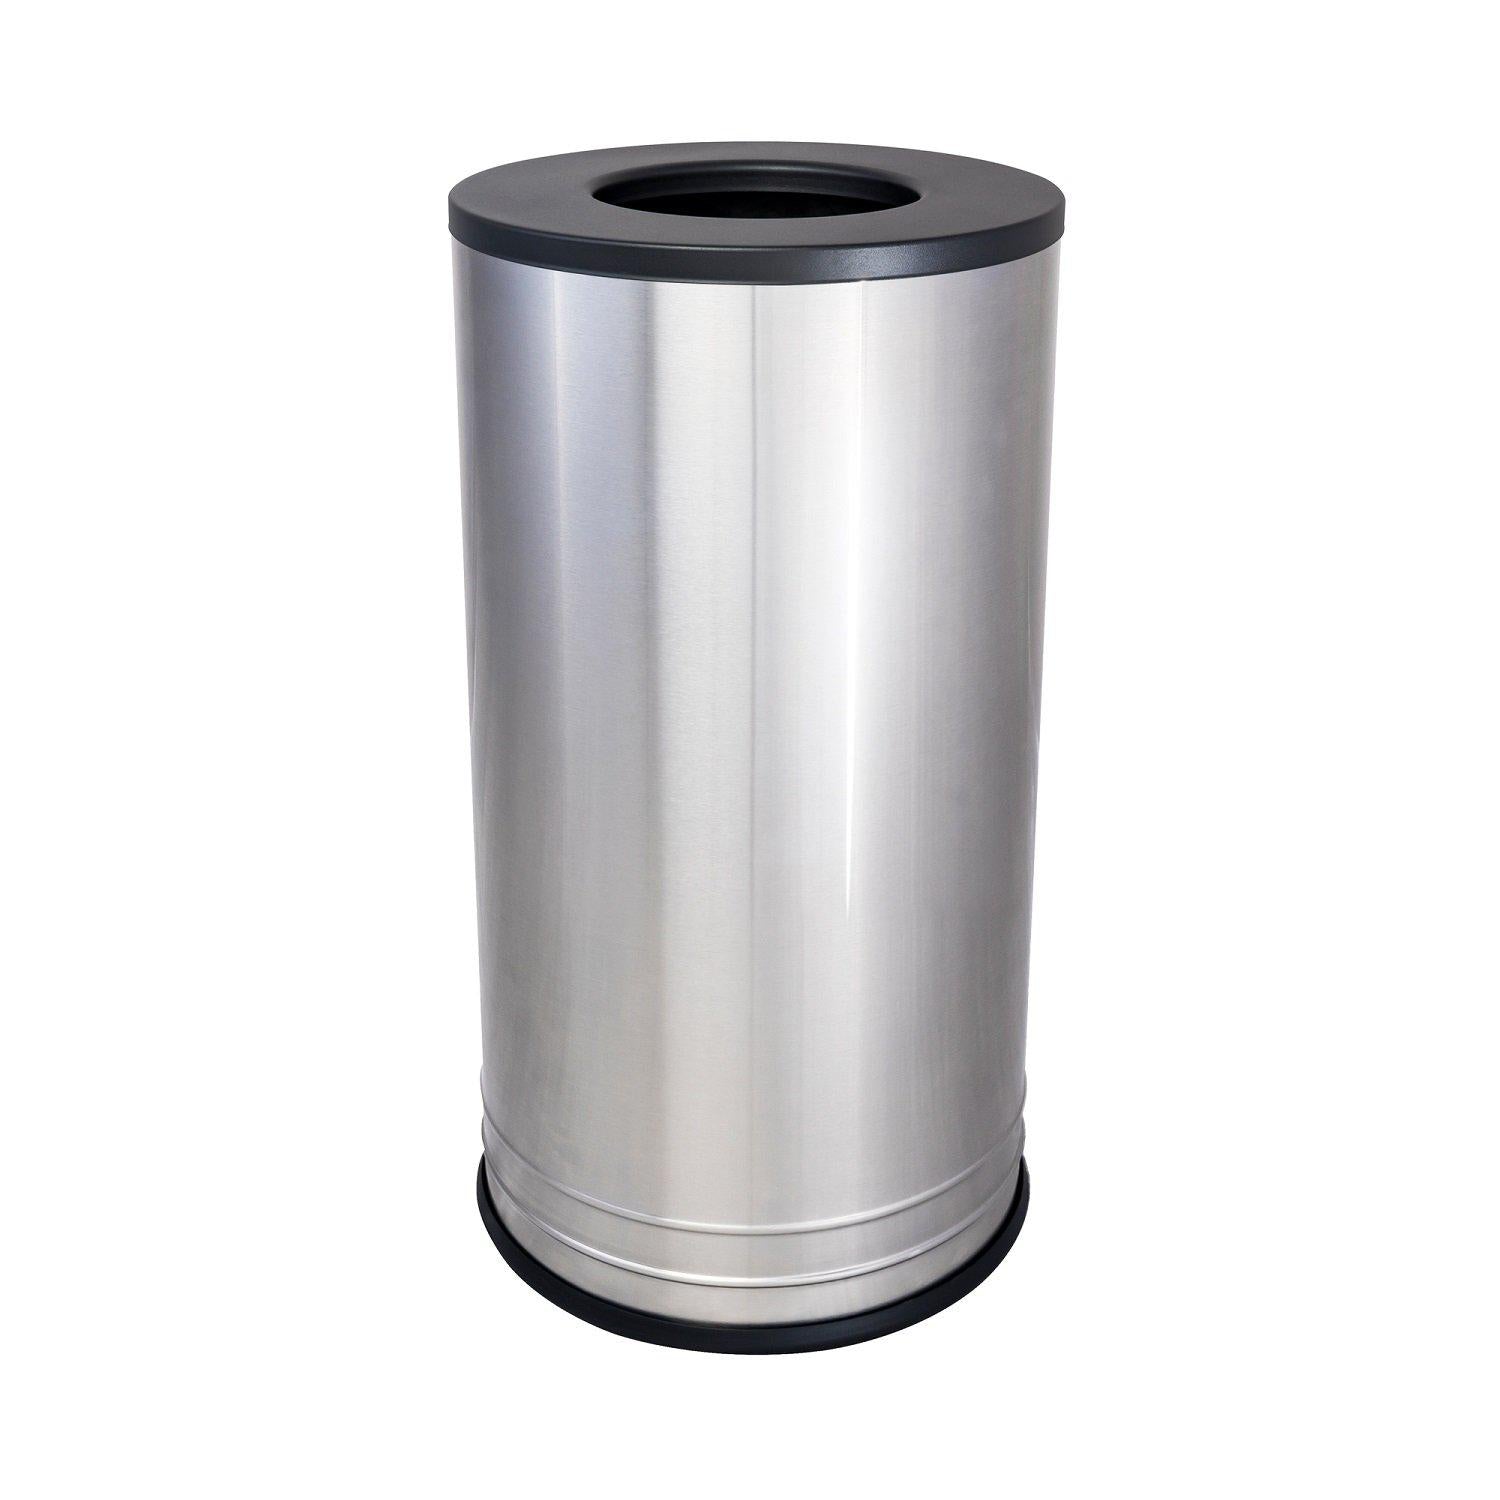 International Collection Flat Top Stainless Steel Indoor Waste Receptacle, 18-Gallon Capacity